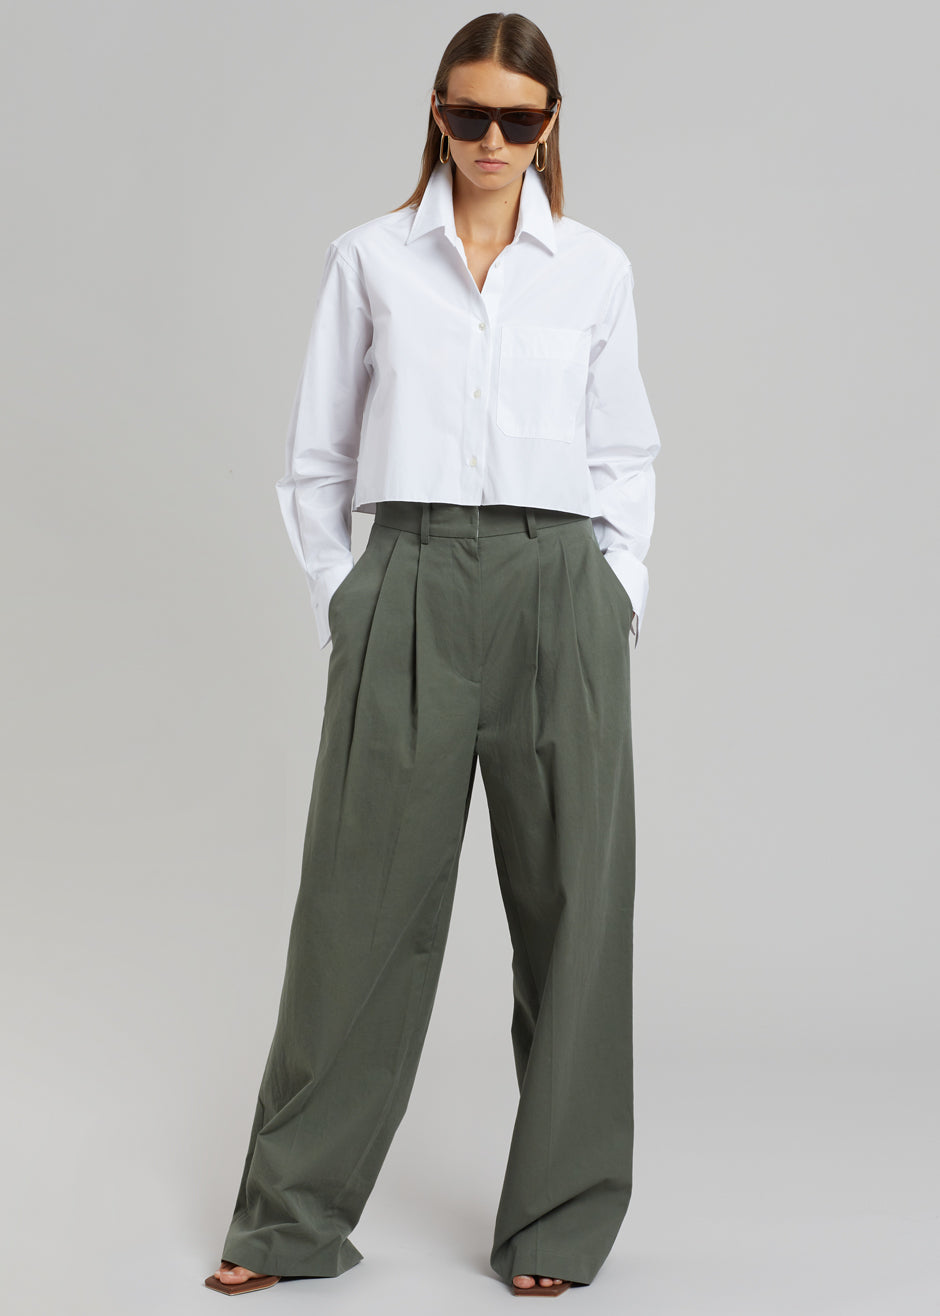 Tansy Cotton Pants - Olive